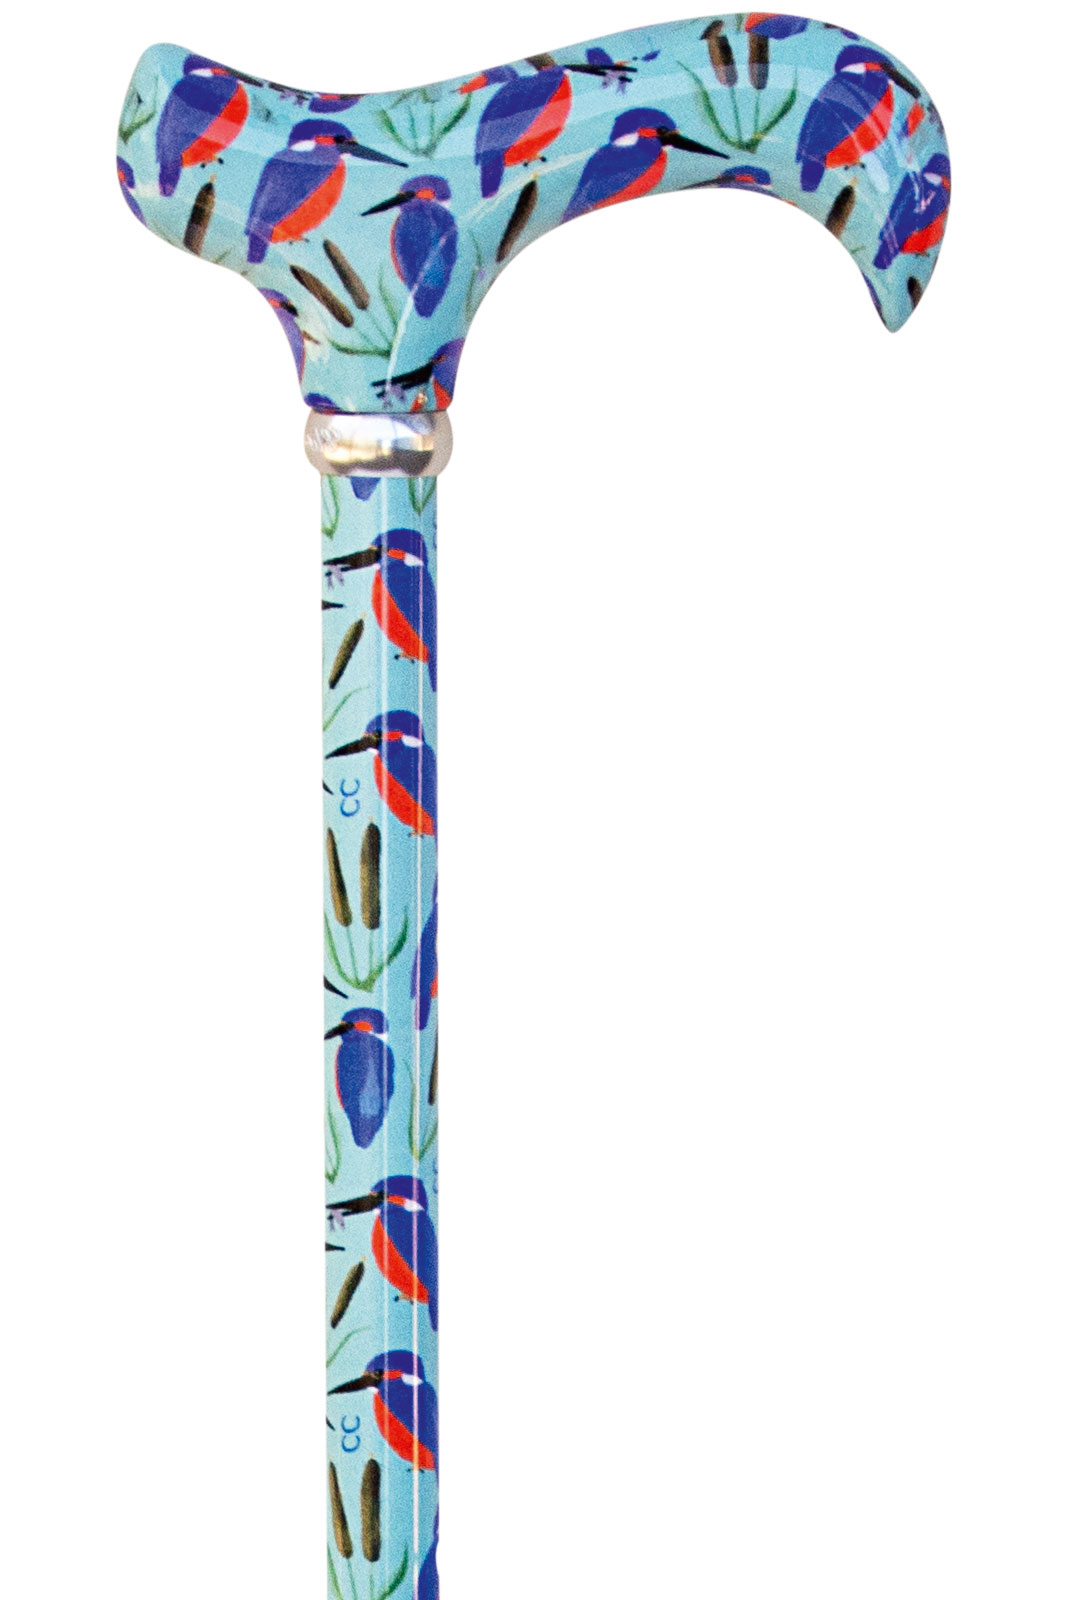 Classic Canes Derby Adjustable Walking Stick - Kingfishers